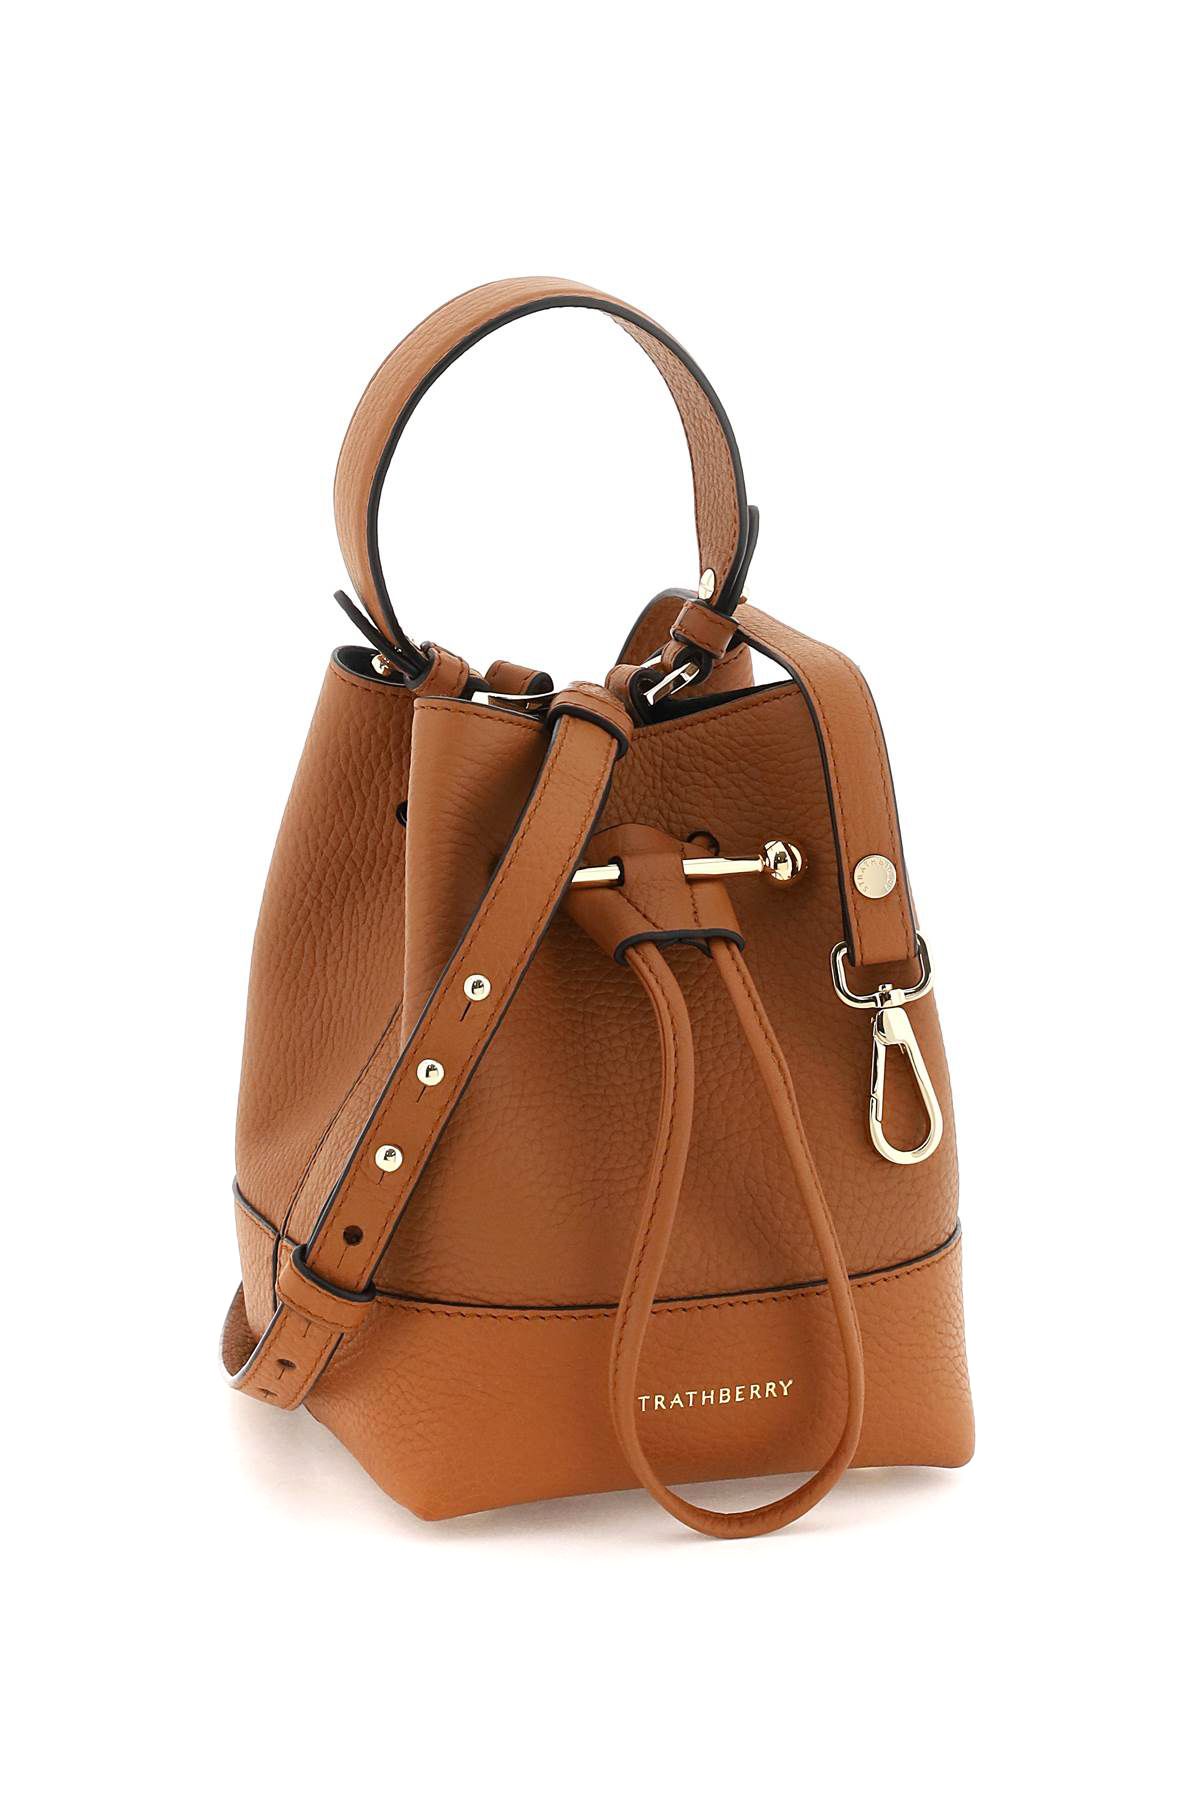 Shop Strathberry Lana Osette Bucket Bag In Brown